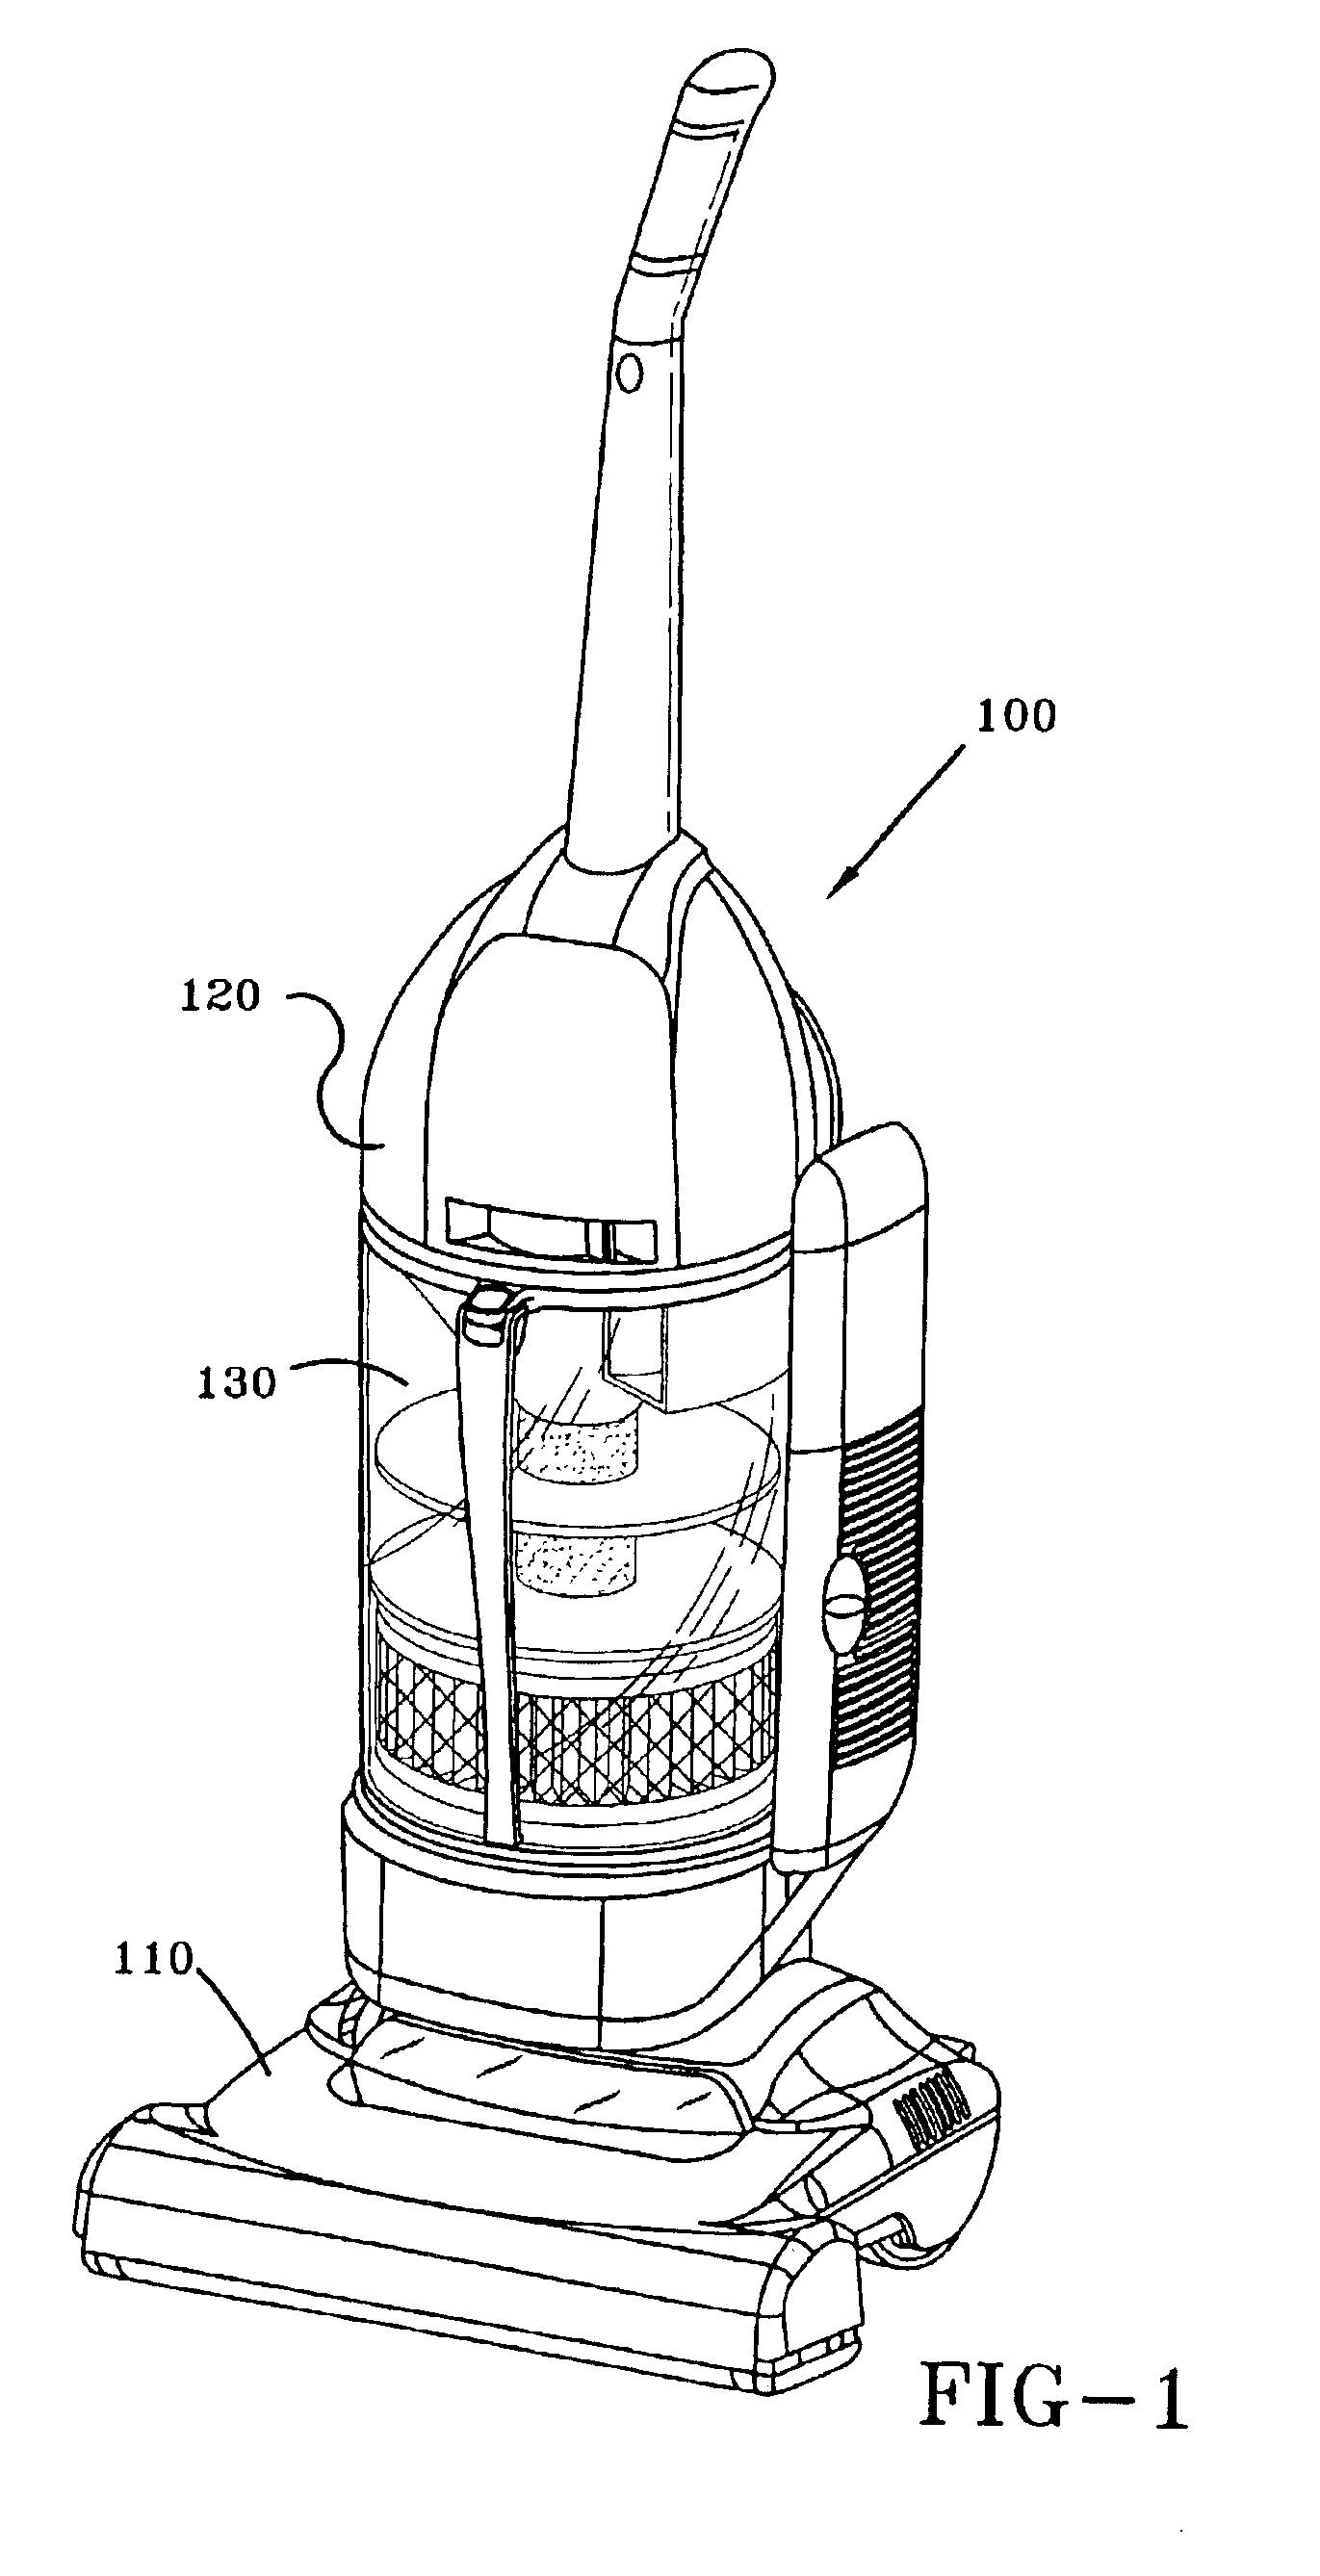 Dirt collecting system for a floor care appliance